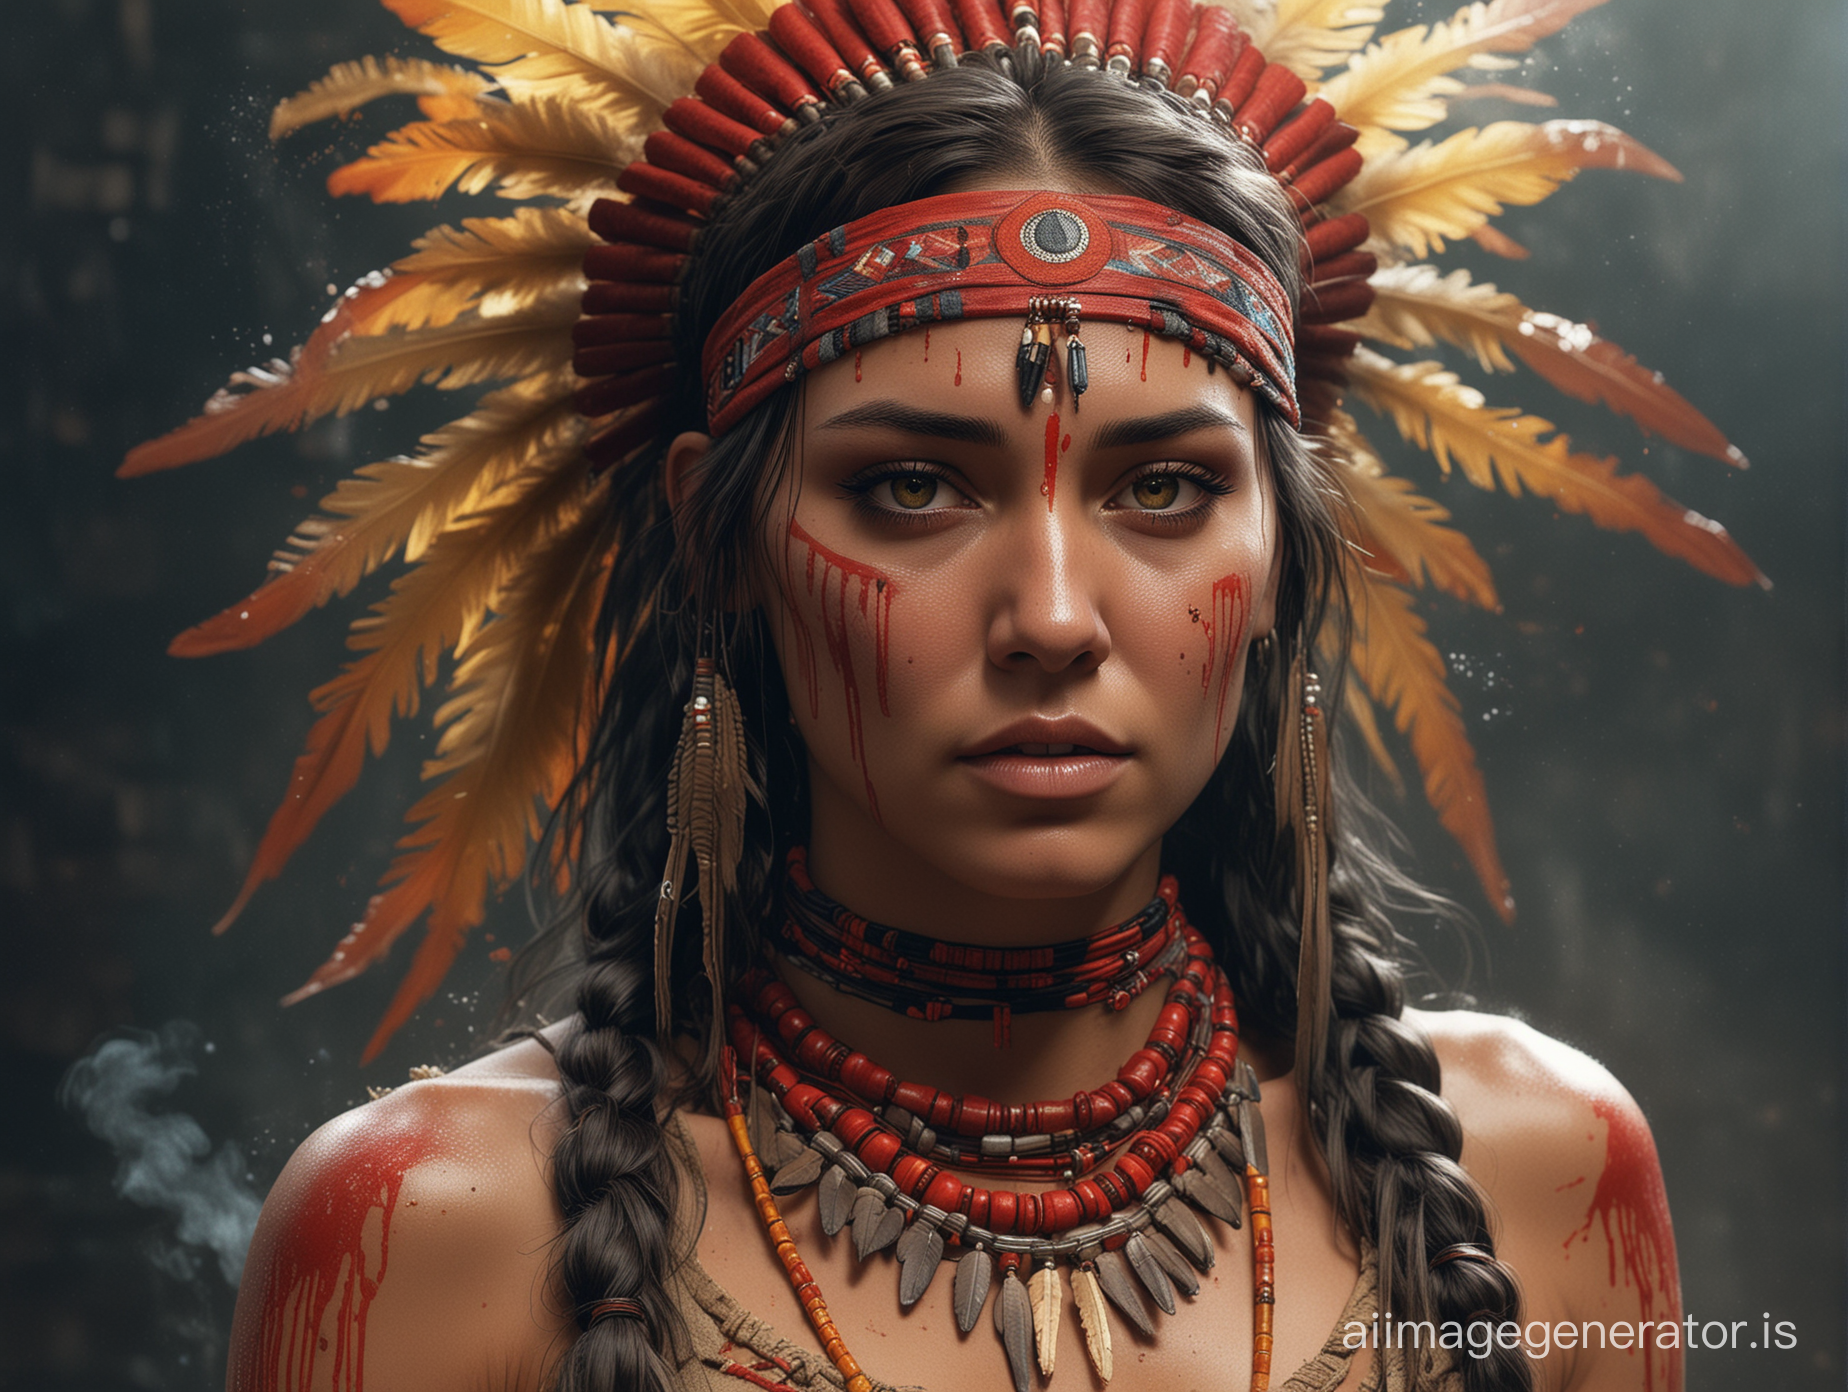 The whole body with legs and arms. An American woman, a 20-year-old brunette dressed as a Native American from the reservation. The model. The face is painted with red paint. The eyes are yellow. The whole body.Digital art, ultra-realistic, clear focus, LEDs, smoke, artillery, sparks, racks, system unit, motherboard, Pascal Blanche Rutkowski, painting in hyperrealistic repin artstation style, concept art with detailed character design, matte painting, 4 kb resolution, blade runner, photo r3al Epic cinematic brilliant stunning intricate meticulously detailed dramatic atmospheric maximalist digital matte painting